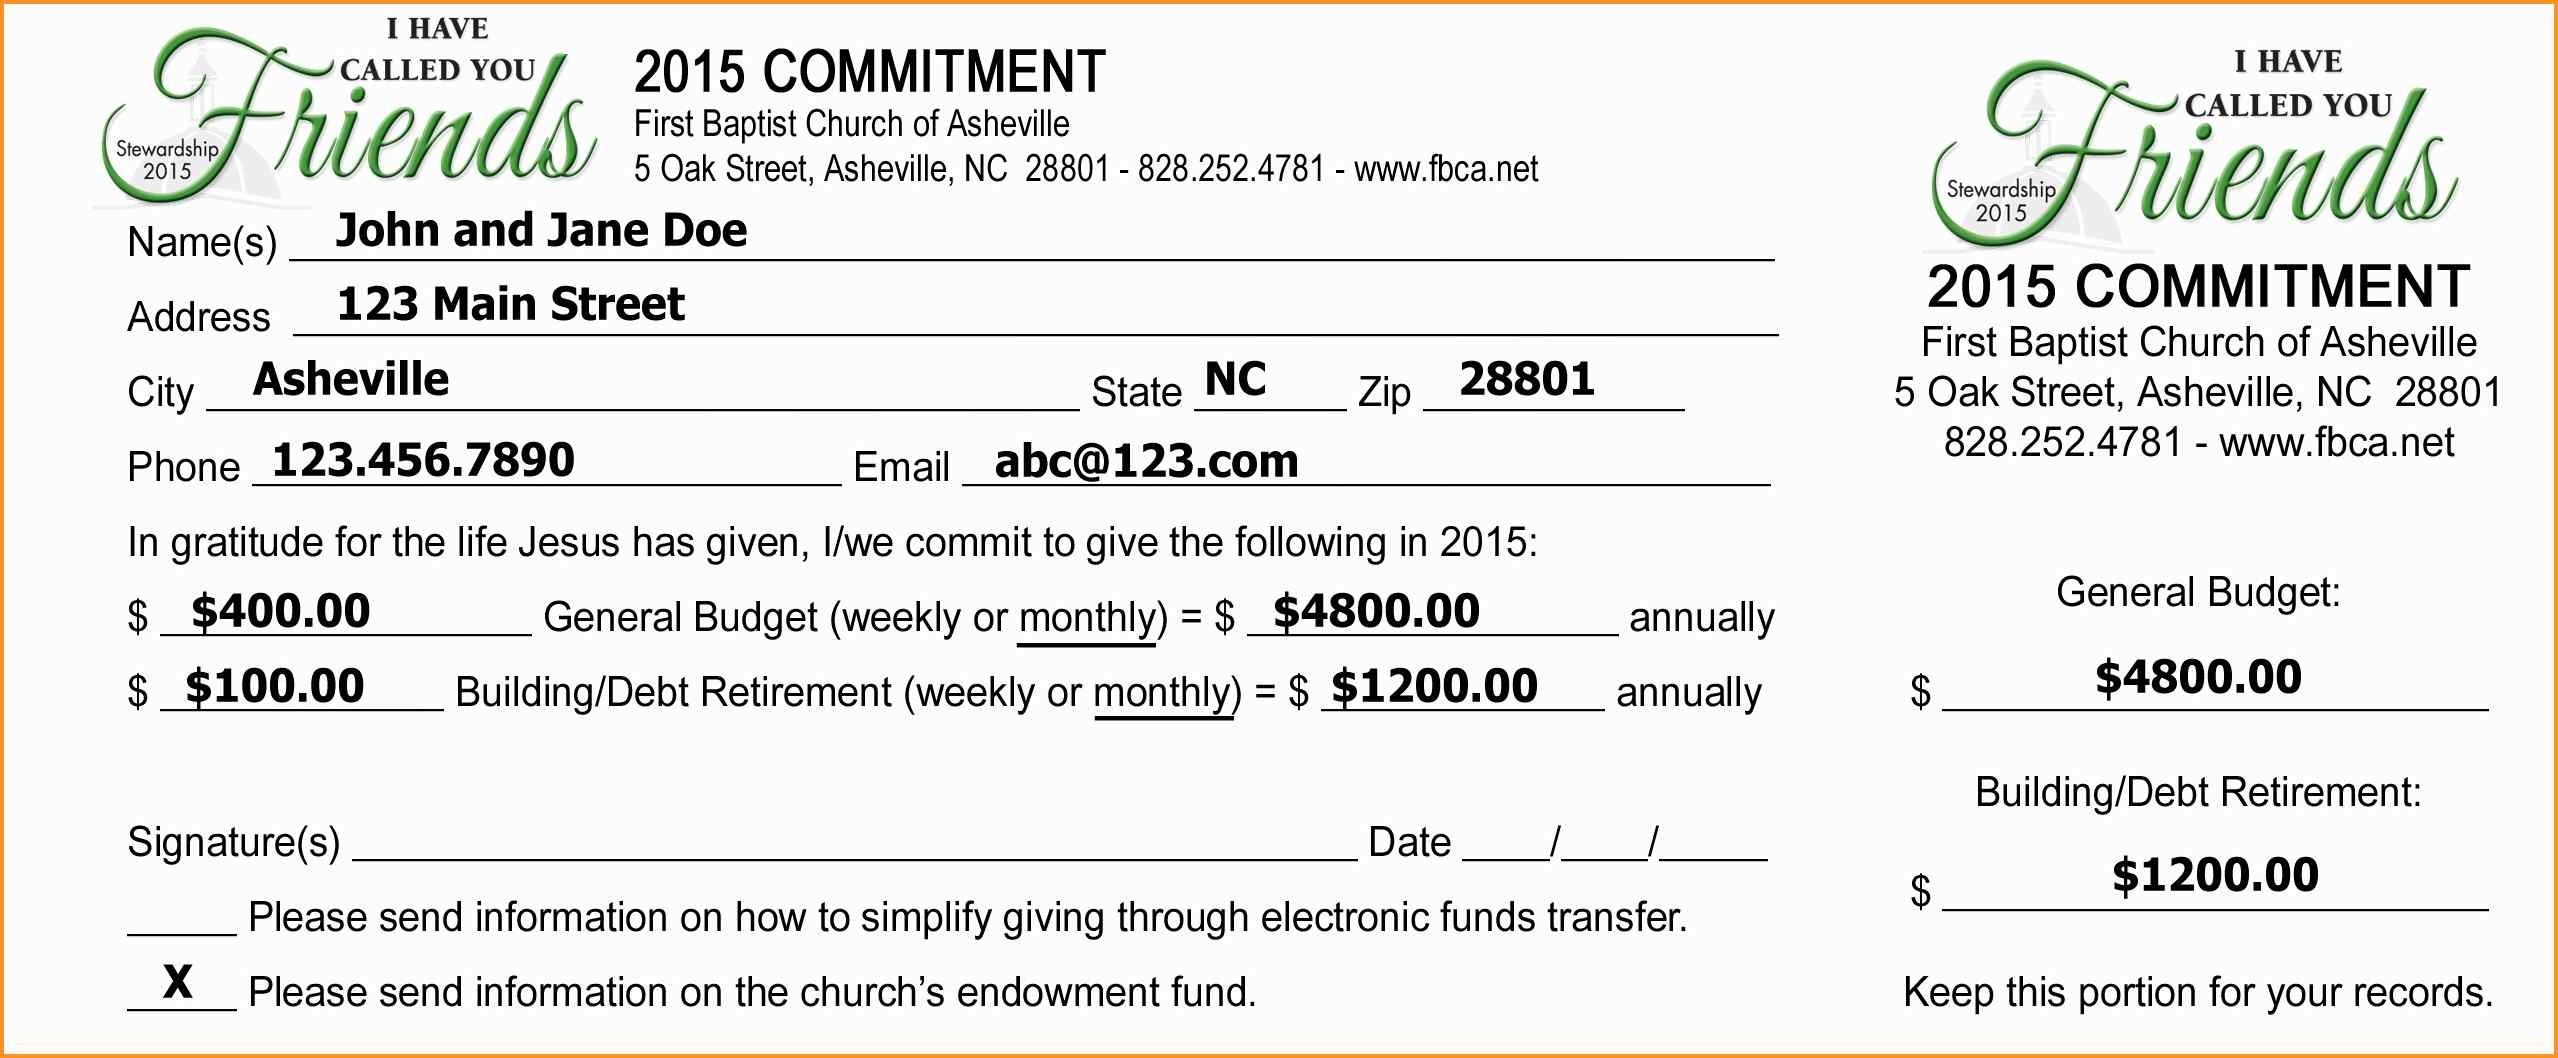 Pledge Cards Template Free Card Donation Excel Templates For Church within Free Pledge Card Template